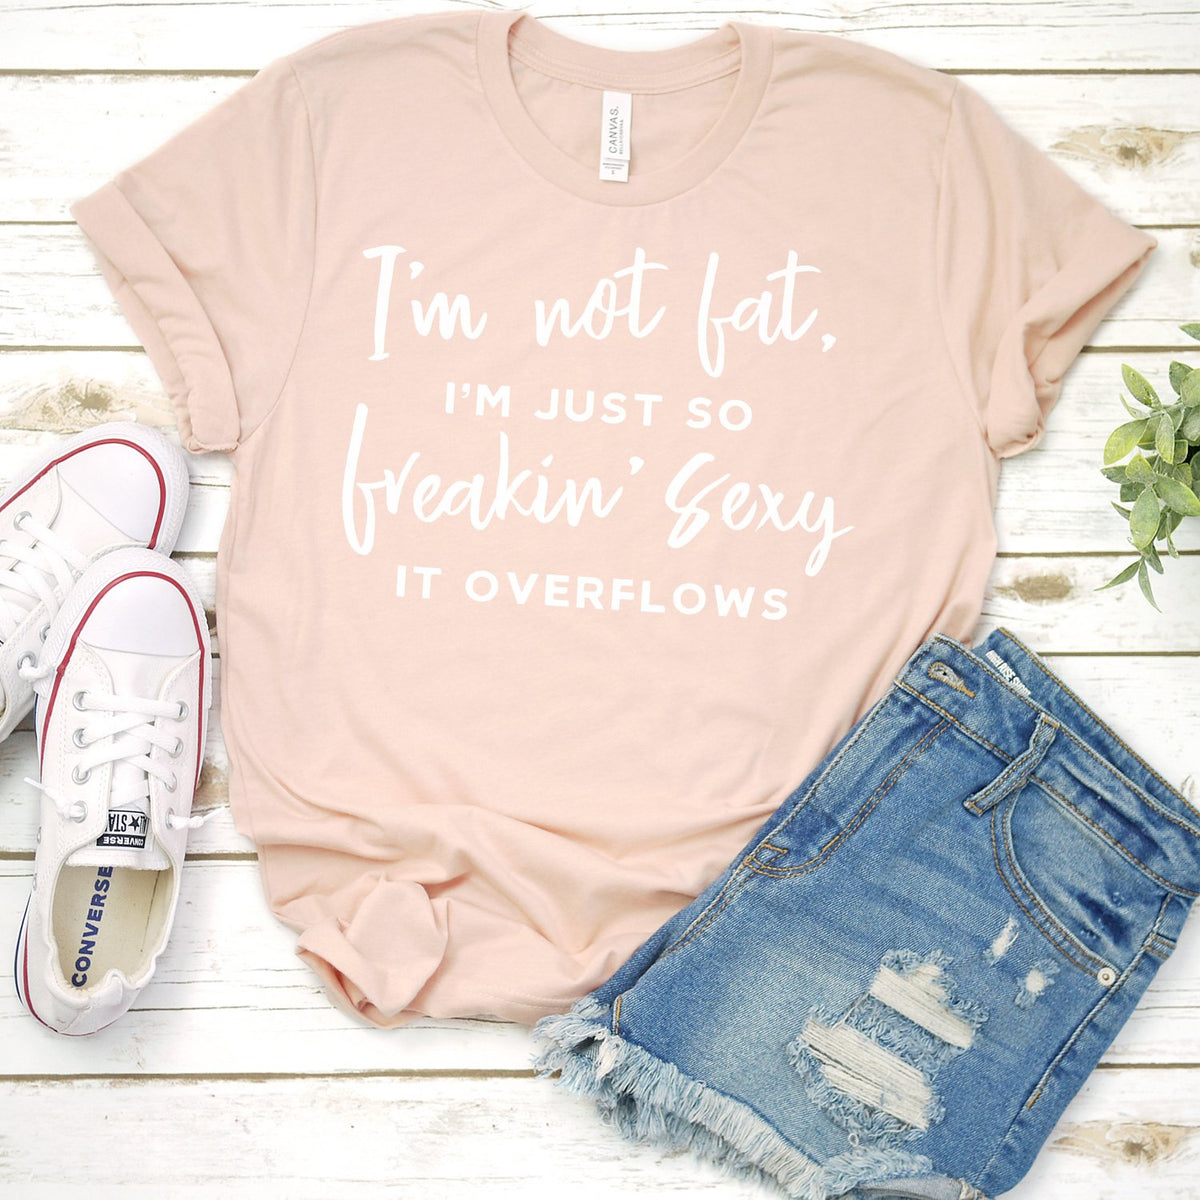 I&#39;m Not Fat, I&#39;m Just So Freakin&#39; Sexy It Overflows - Short Sleeve Tee Shirt